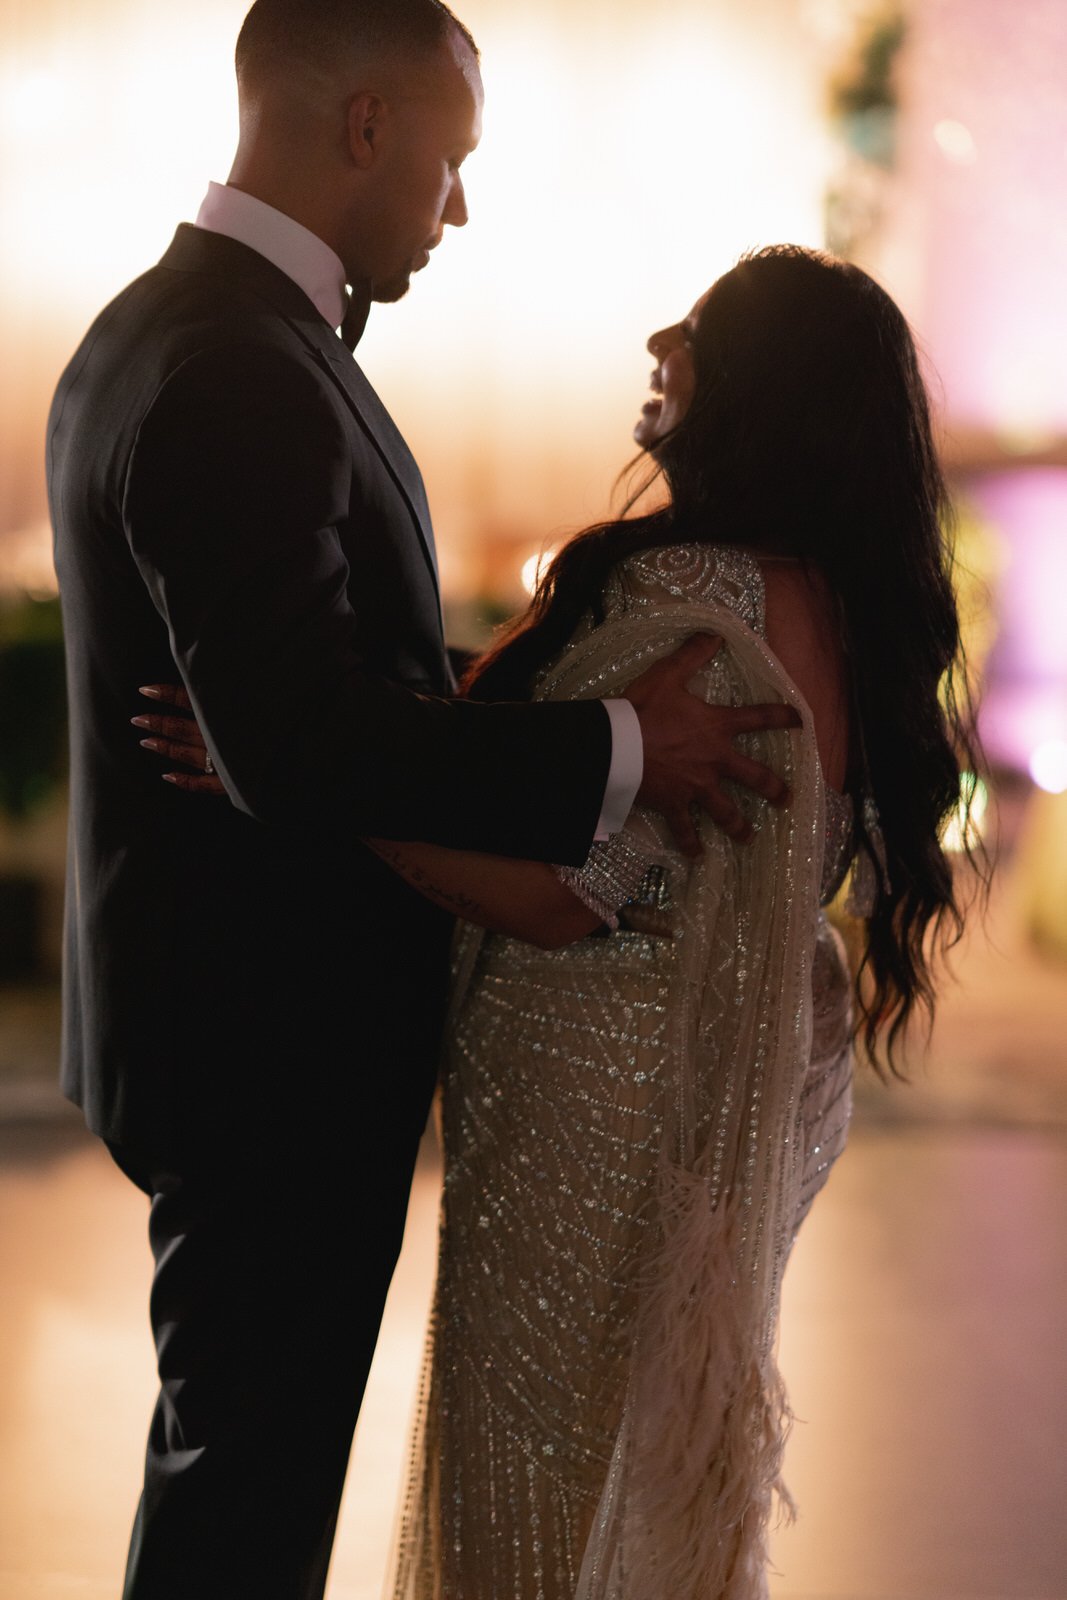 Luxury Indian Wedding in Miami Florida - Indian wedding photographer miami florida - michelle gonzalez photography - loews hotel in coral gables wedding-125.jpg